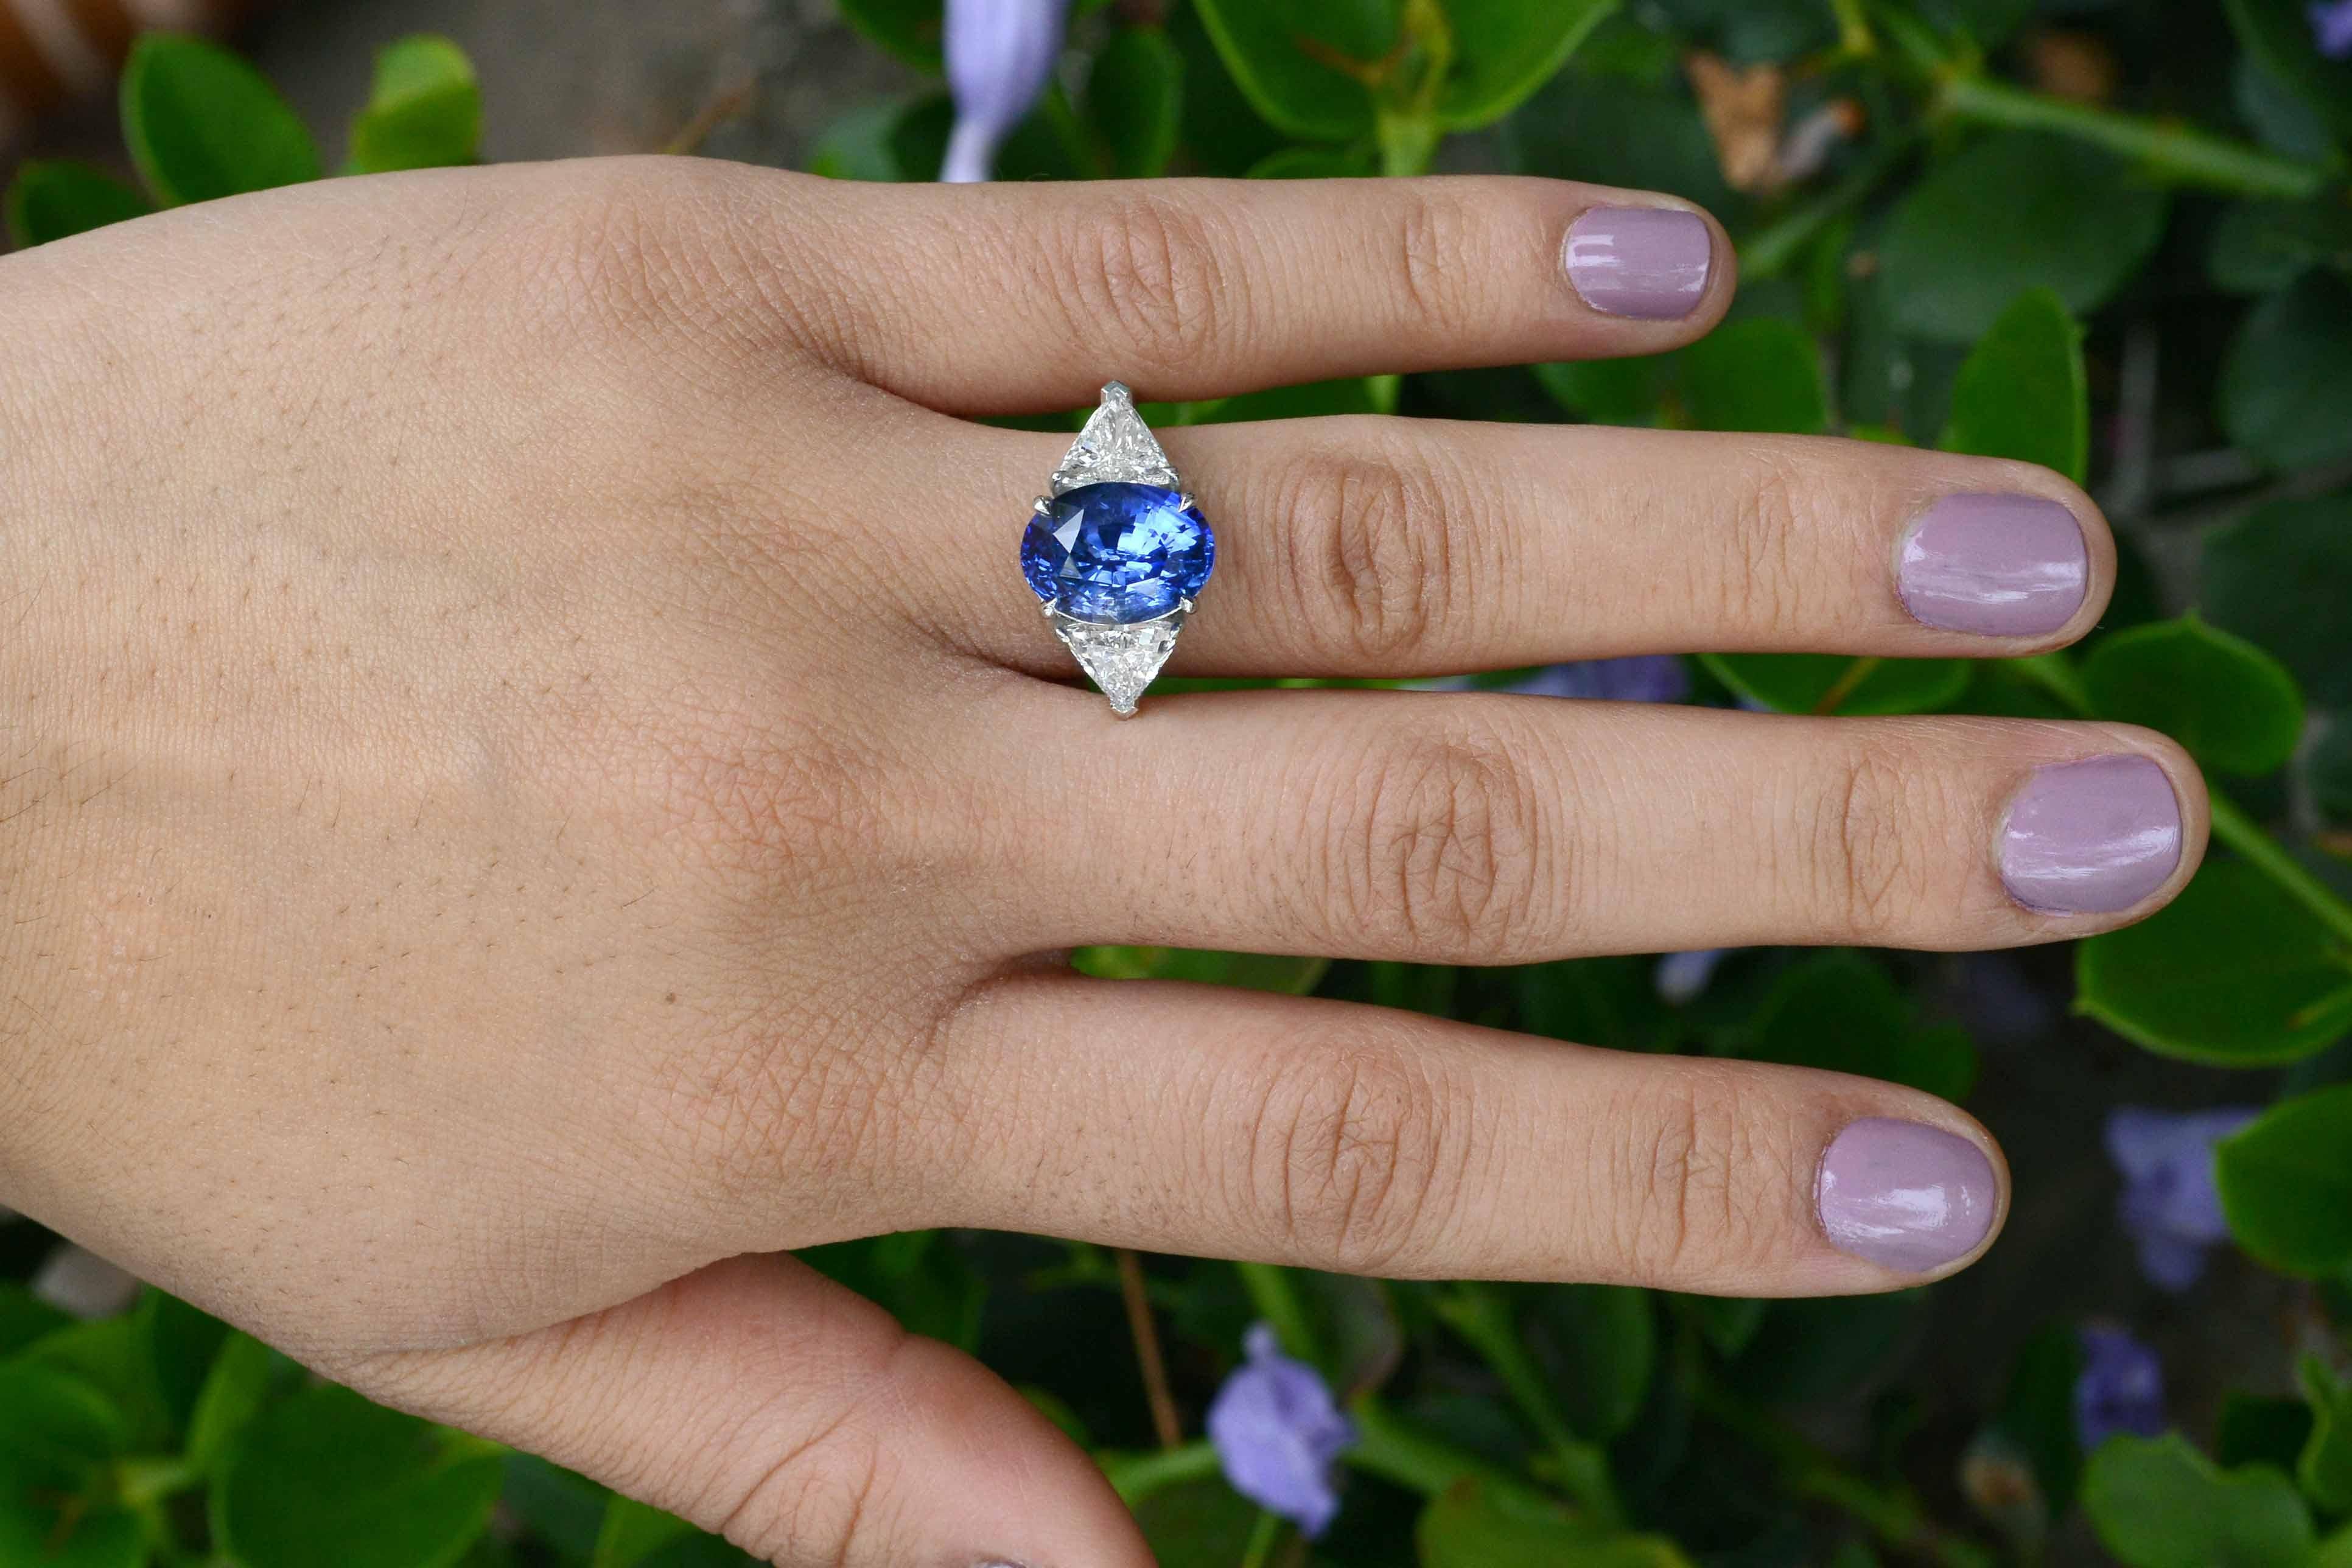 The Palo Alto trinity ring. An important sapphire and diamond 3 stone ring with a WOW factor second to none. Worn as an engagement ring or statement cocktail piece, it is hard to miss. Centered by a near 7 carat oval gemstone with an incredible,